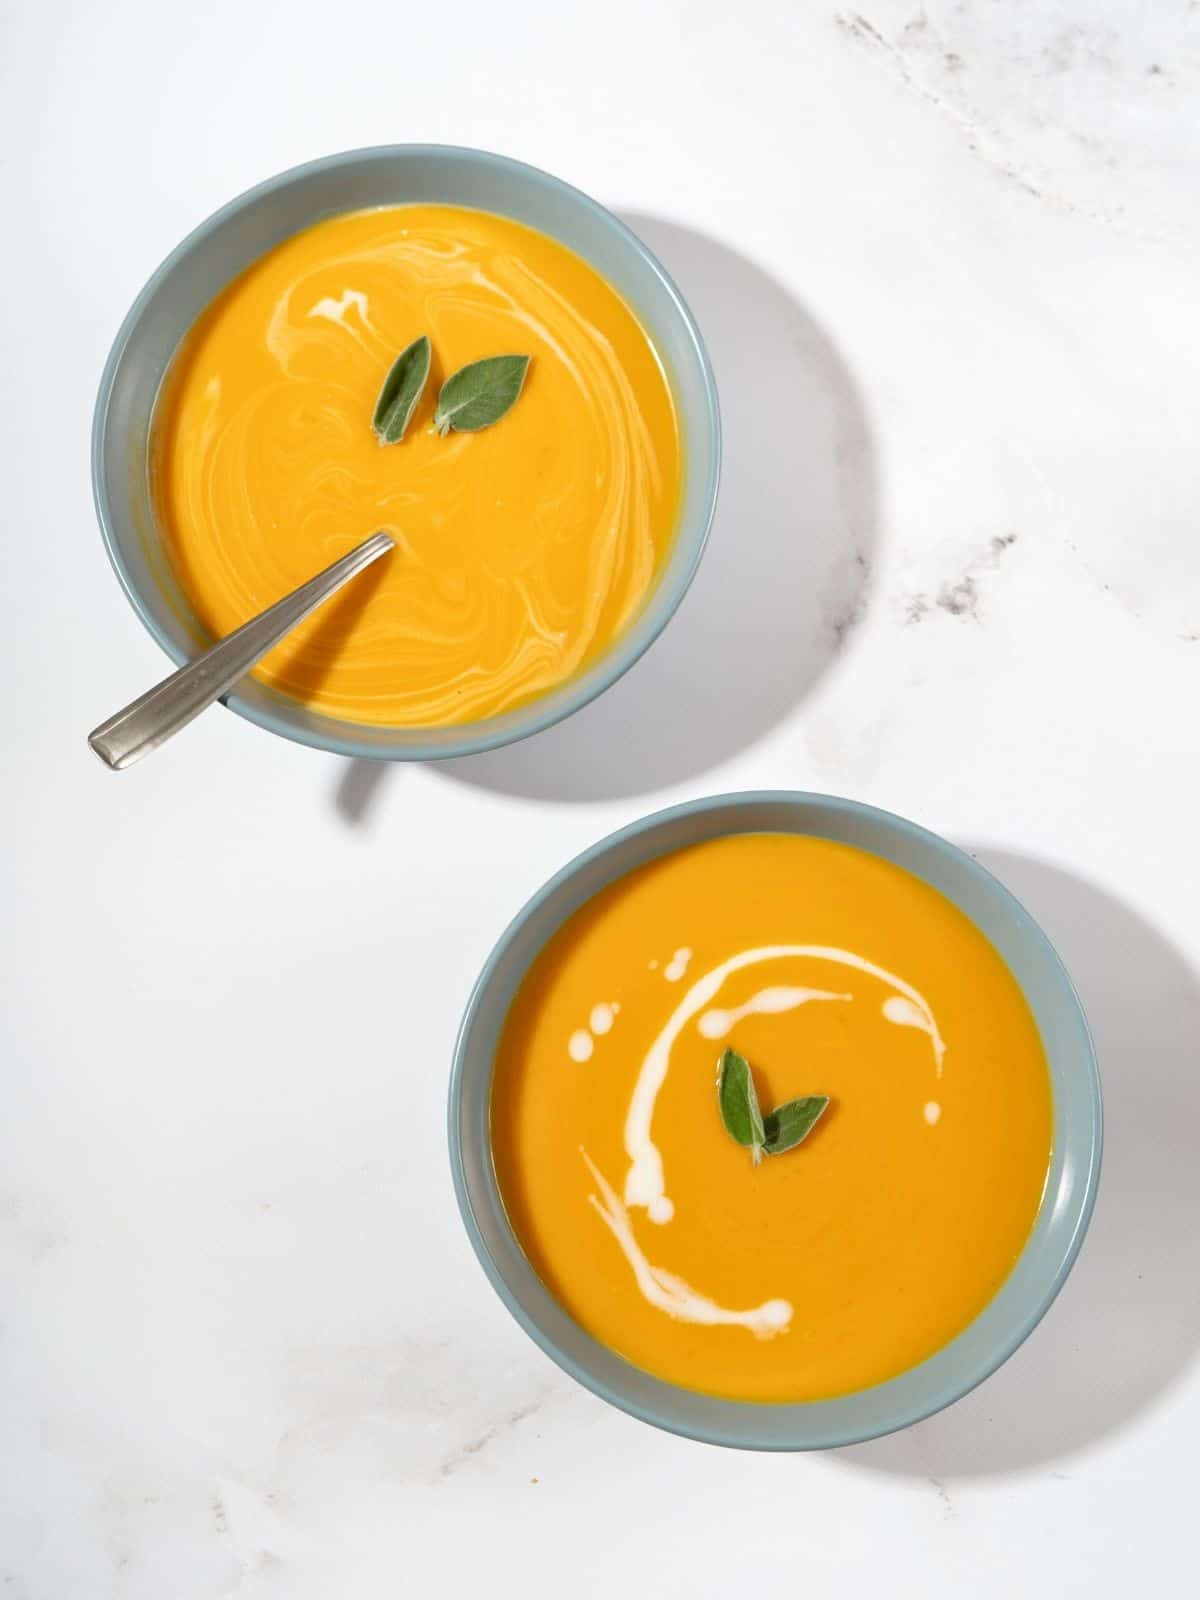 butternut squash and sweet potato soup, topped with some herbs, in a bowl.